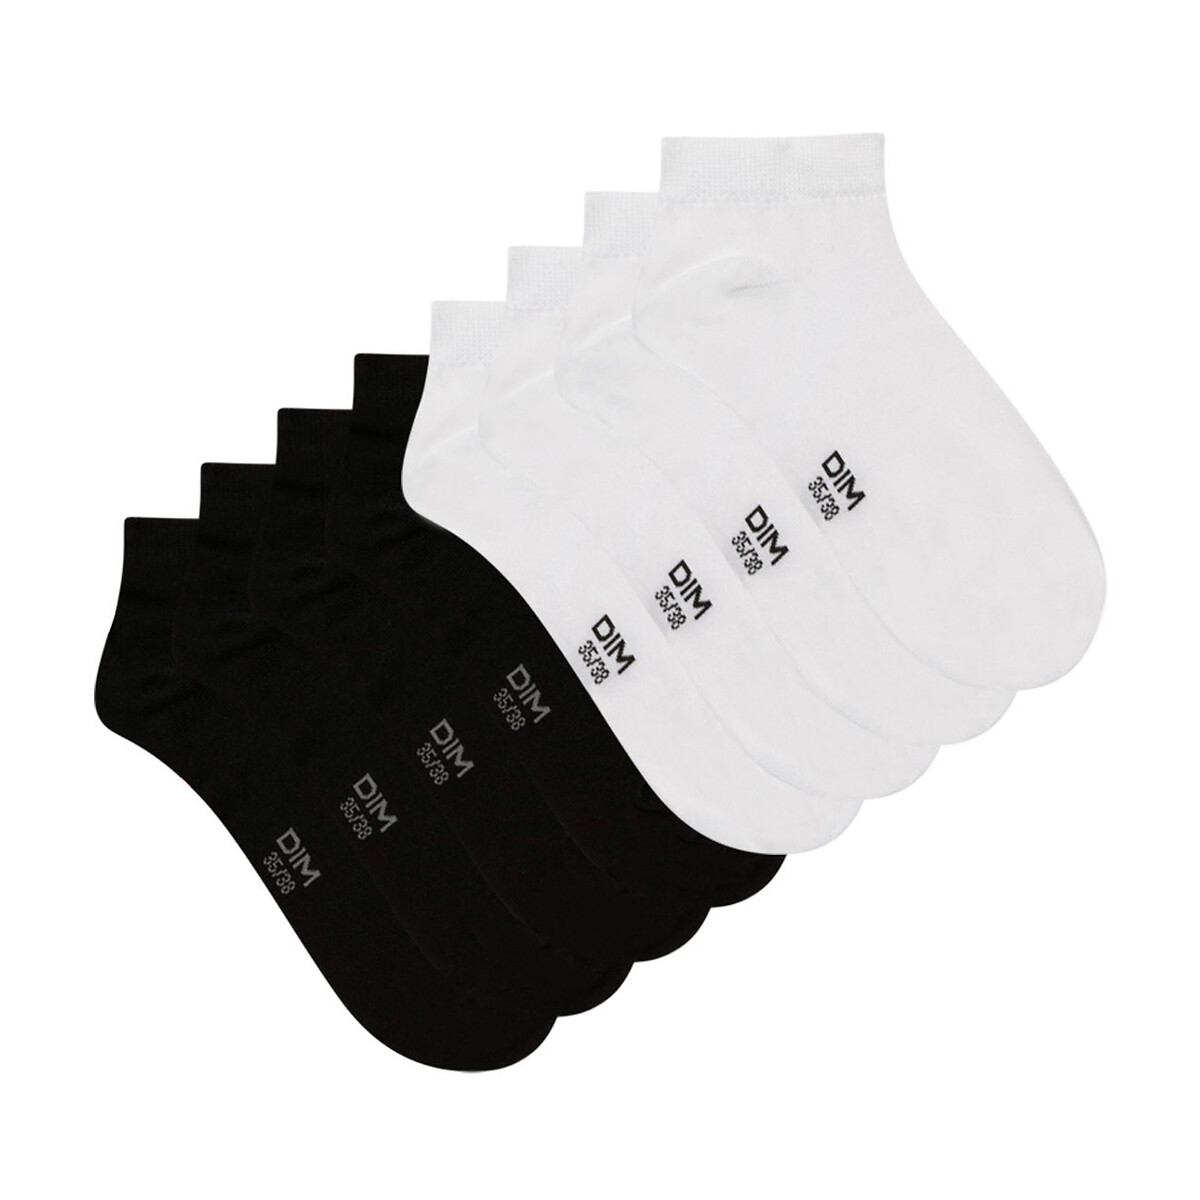 Pack of 4 pairs of invisible socks in cotton mix, 2 white + 2 black, Dim